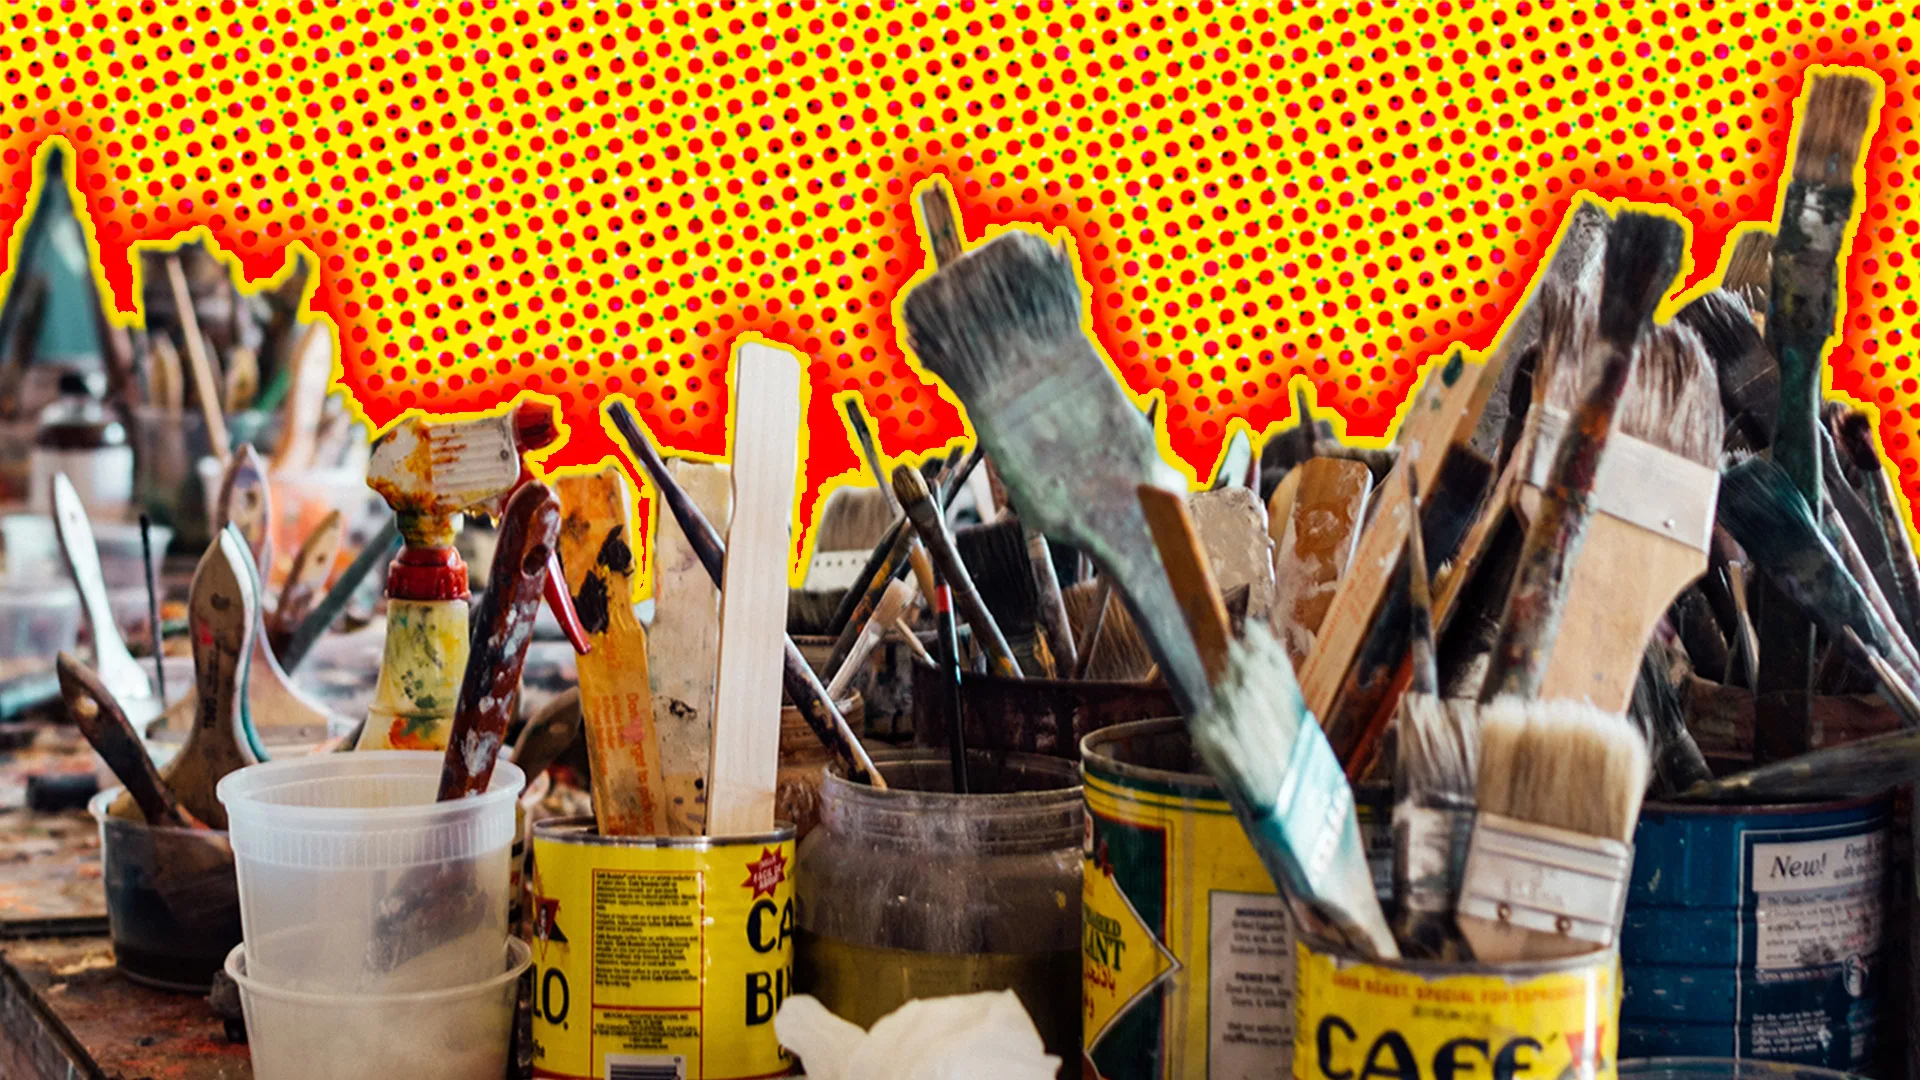 Artists paintbrushes in graphic house style